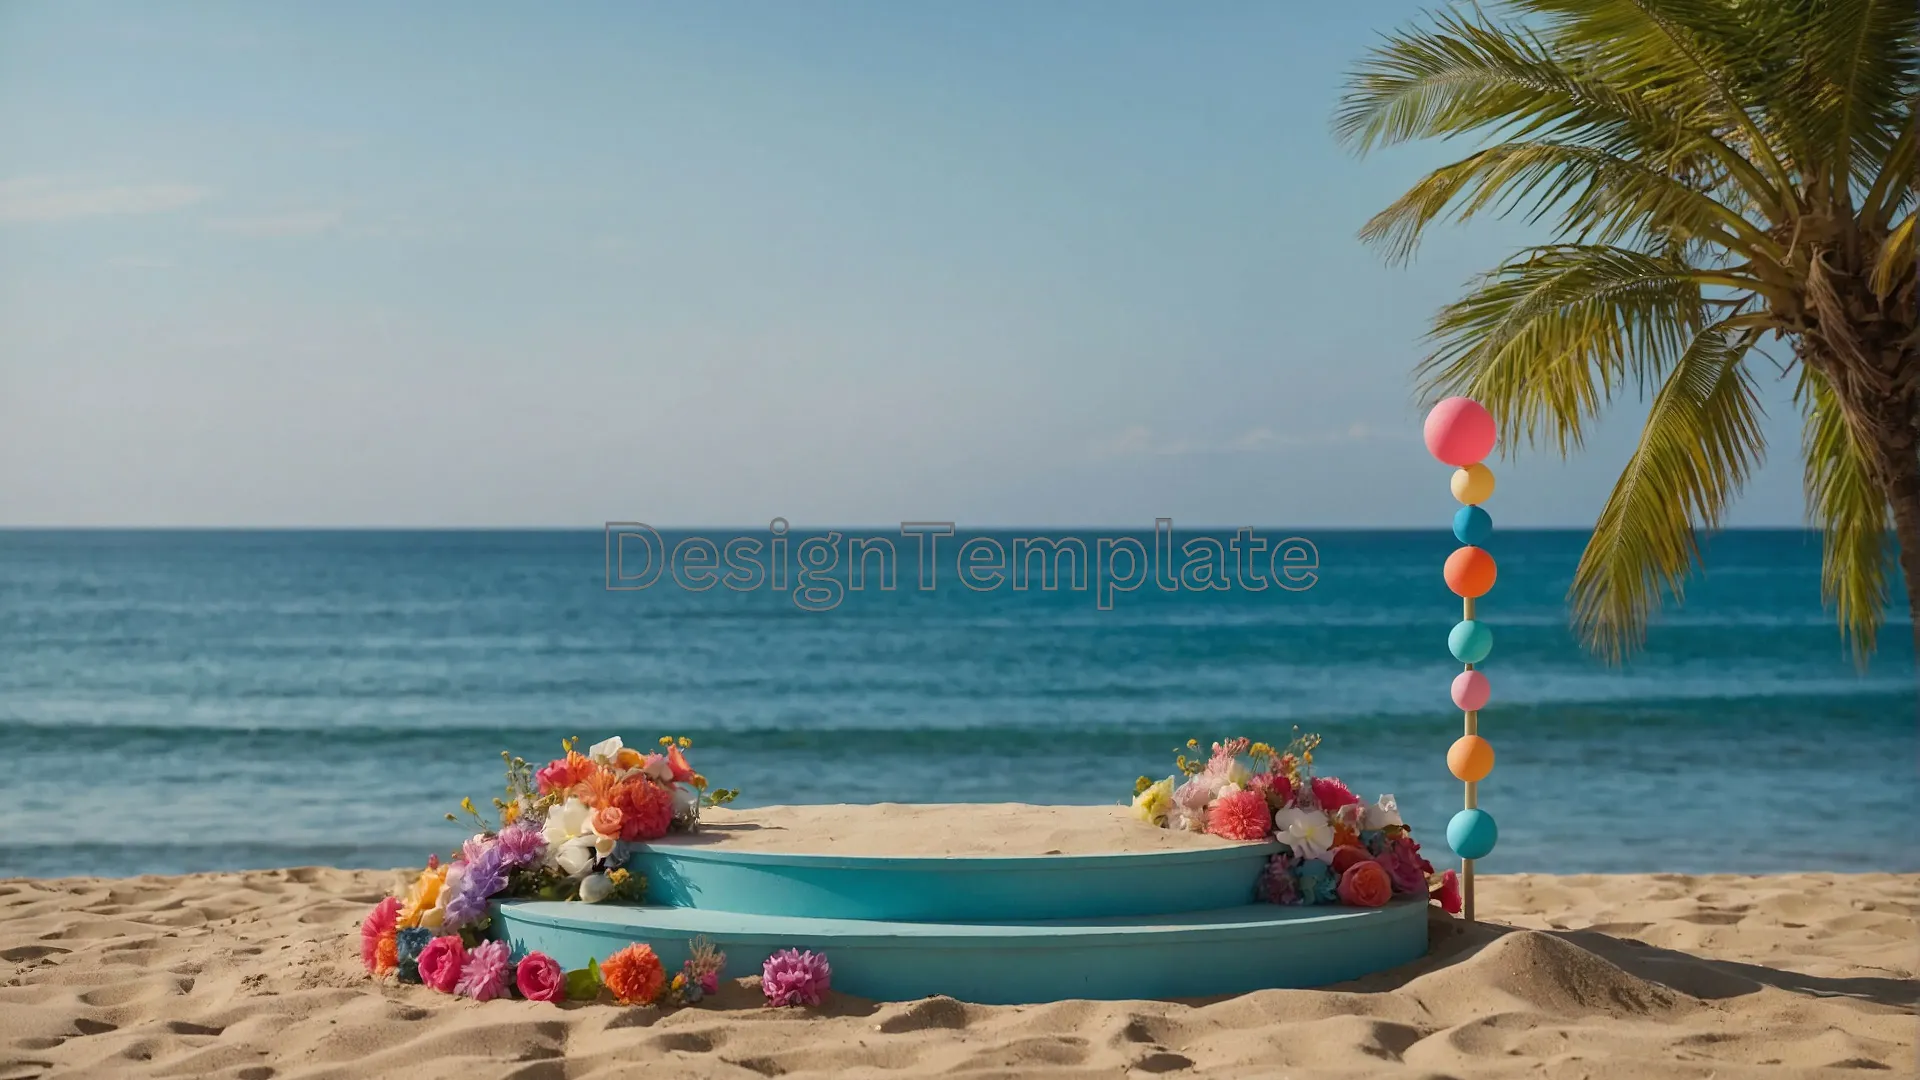 Vibrant 3D Circle Podium in Fresh Colors for a Stunning Summer Sale Photo